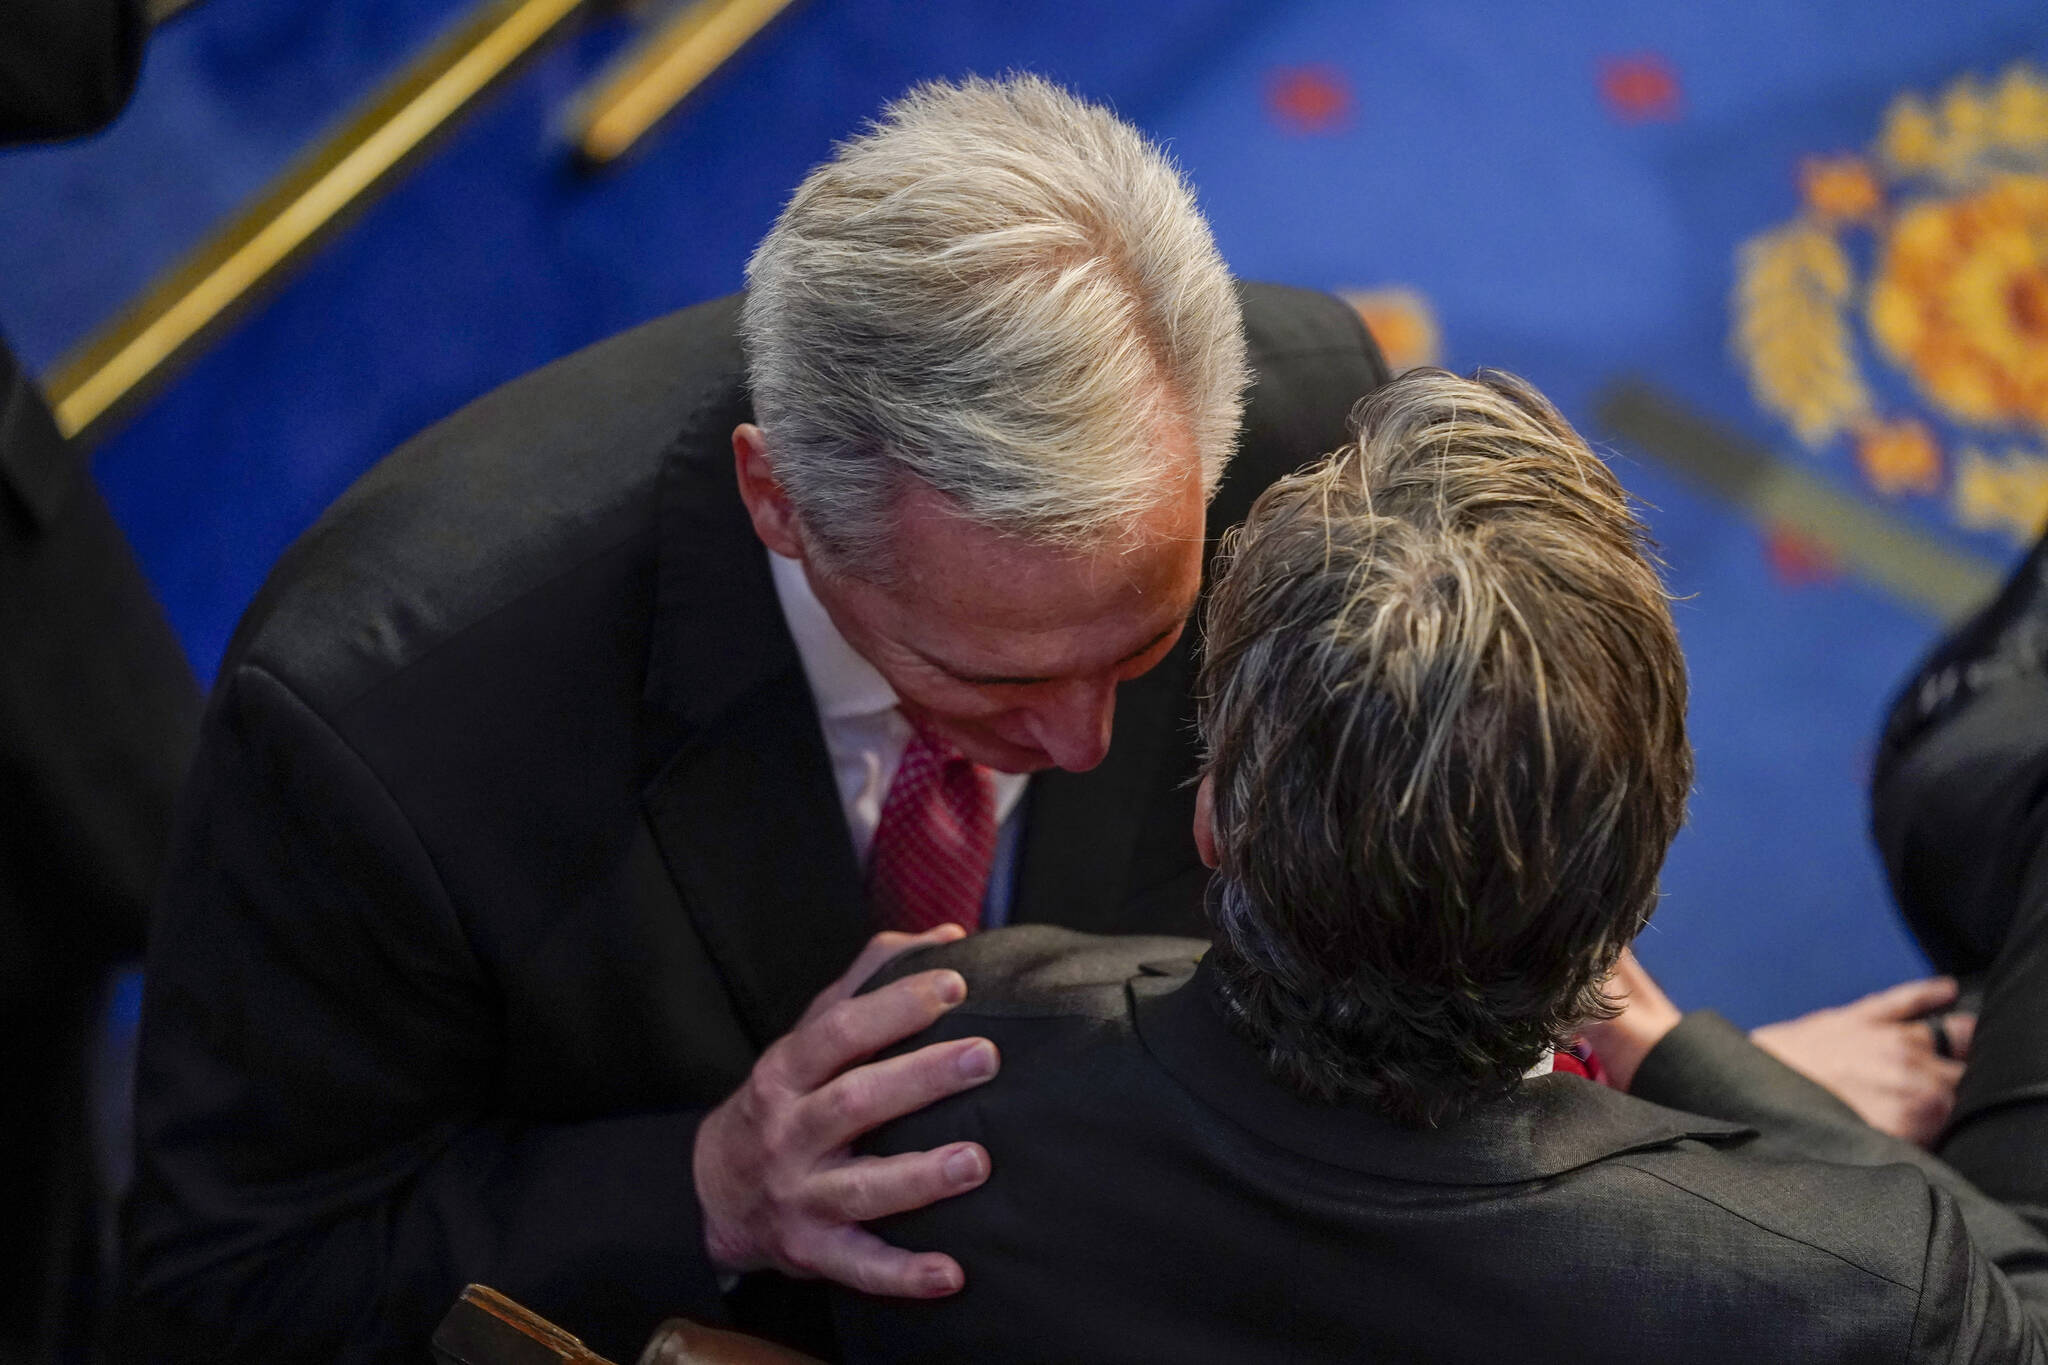 AP Photo / Andrew Harnik 
Rep. Kevin McCarthy, R-Calif., talks with Rep. Andy Ogles, R-Tenn. Before the eighth round of voting for speaker as the House meets for the third day to elect a speaker and convene the 118th Congress in Washington, Thursday, Jan. 5, 2023.